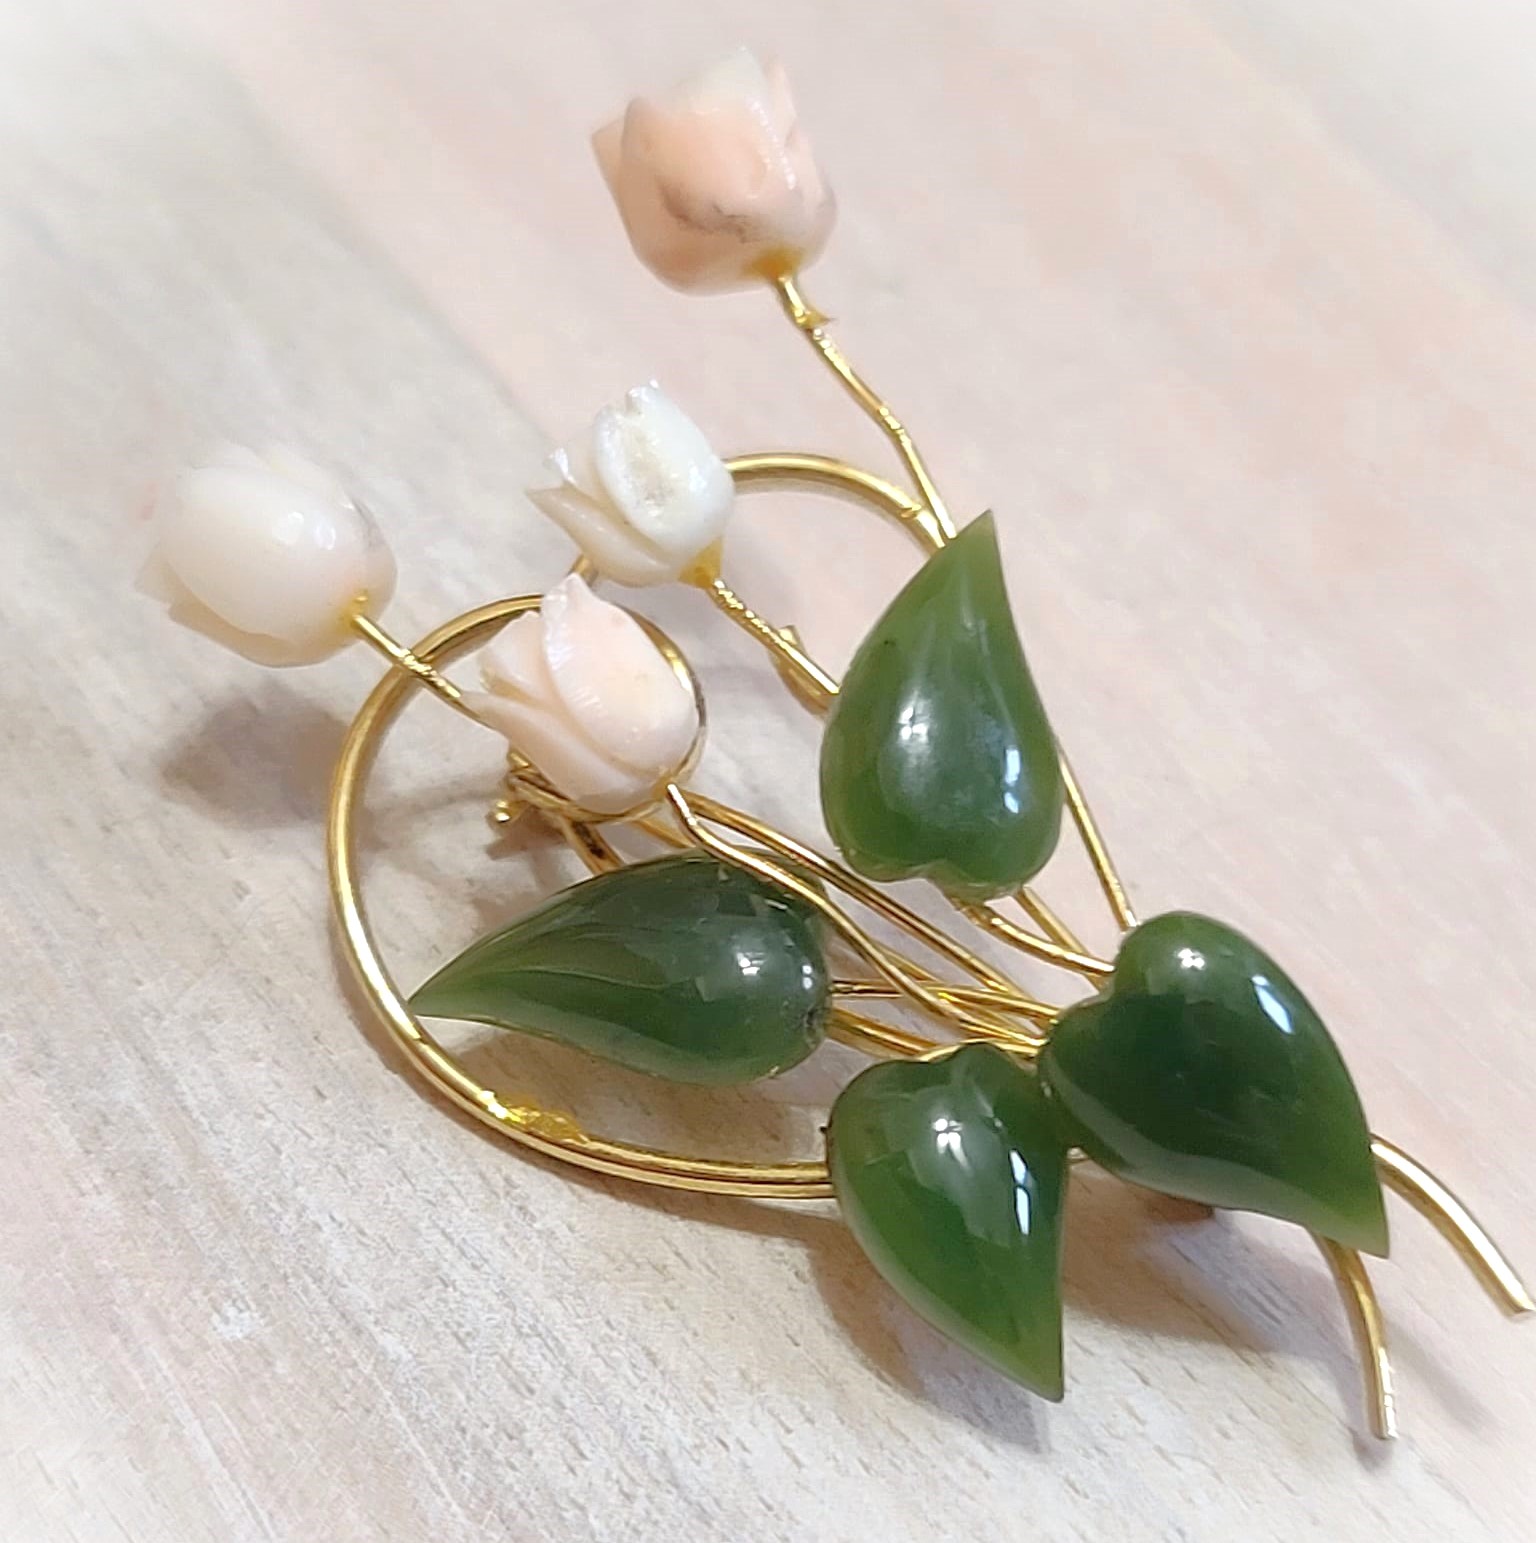 Gemstone pin, with green jade and coral, tulip boutquet pin